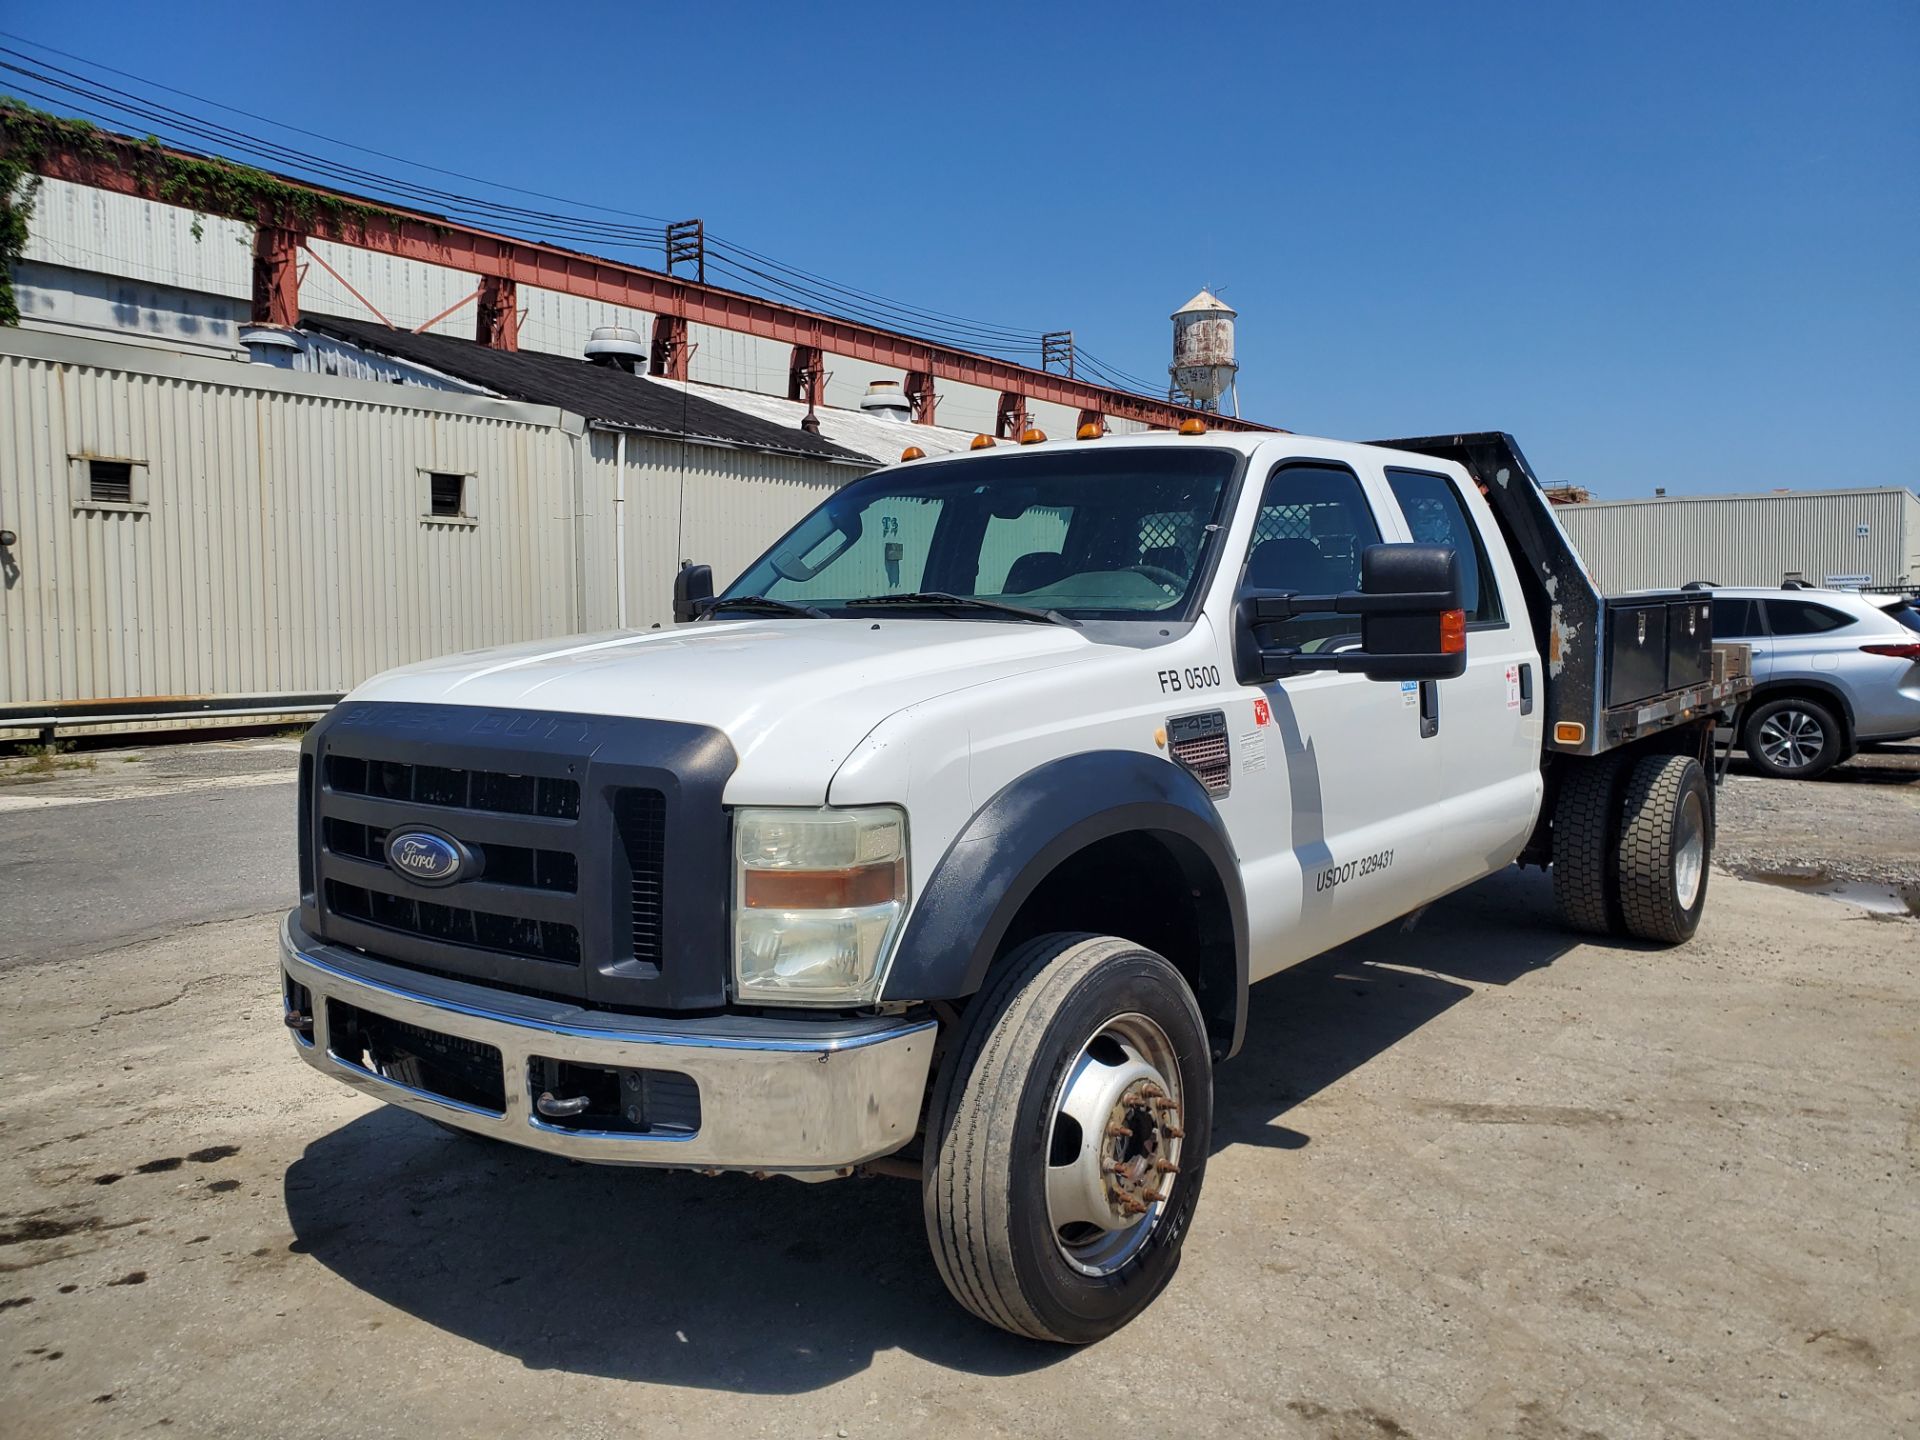 2010 Ford F450 Crew Cab Truck - Image 6 of 21